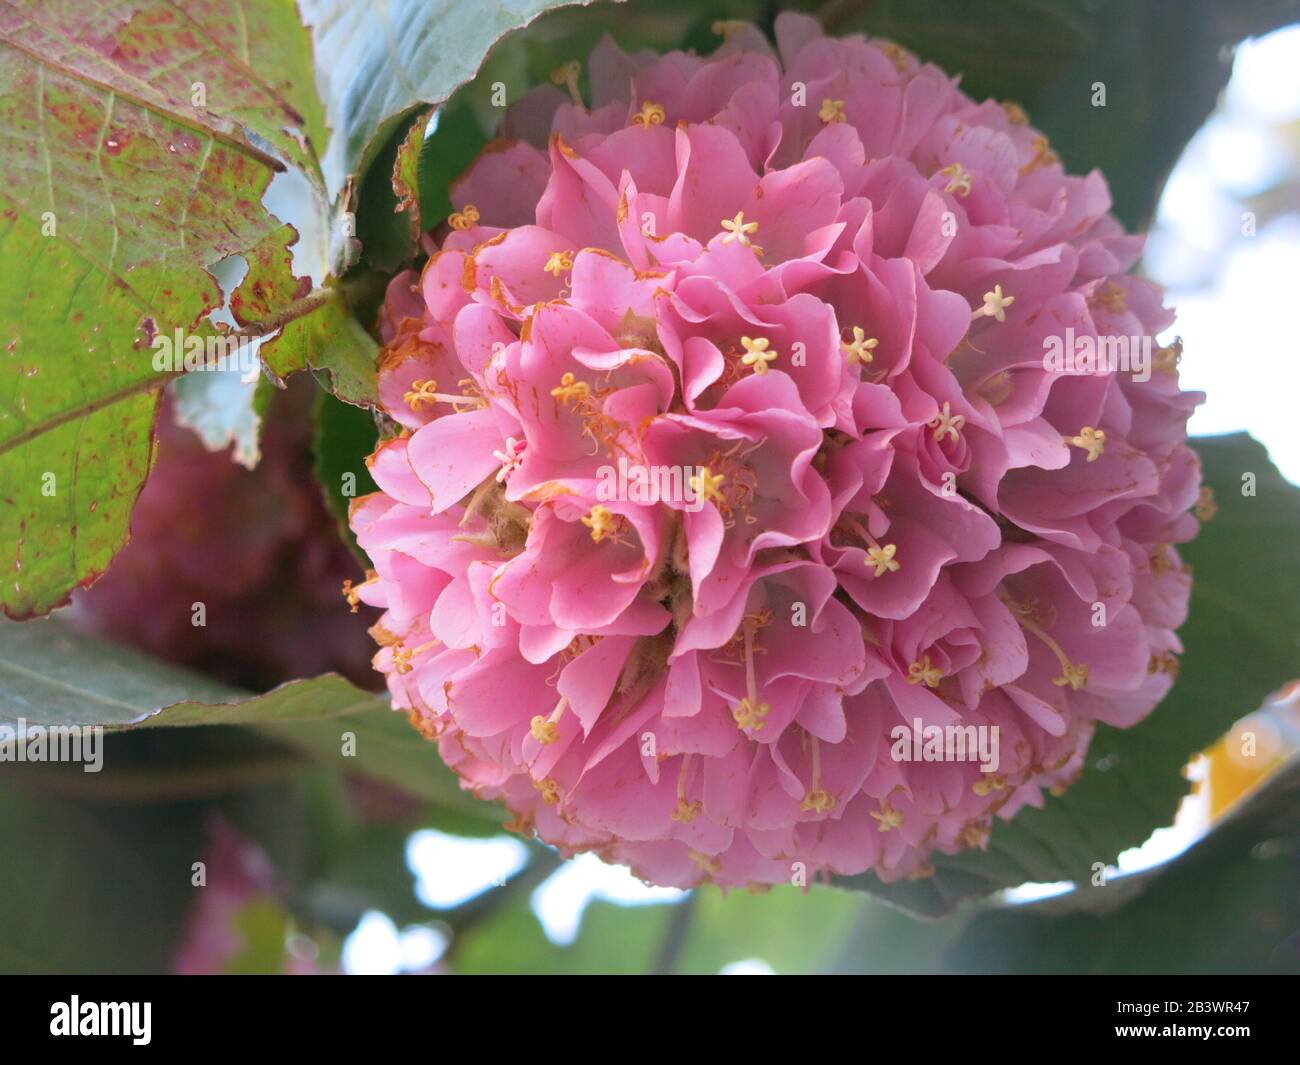 Close-up of the pink pom-pom flower-head of Dombeya x Cayeuxii, a tropical plant from Africa named after botanist Joseph Dombey, resembling hydrangeas. Stock Photo